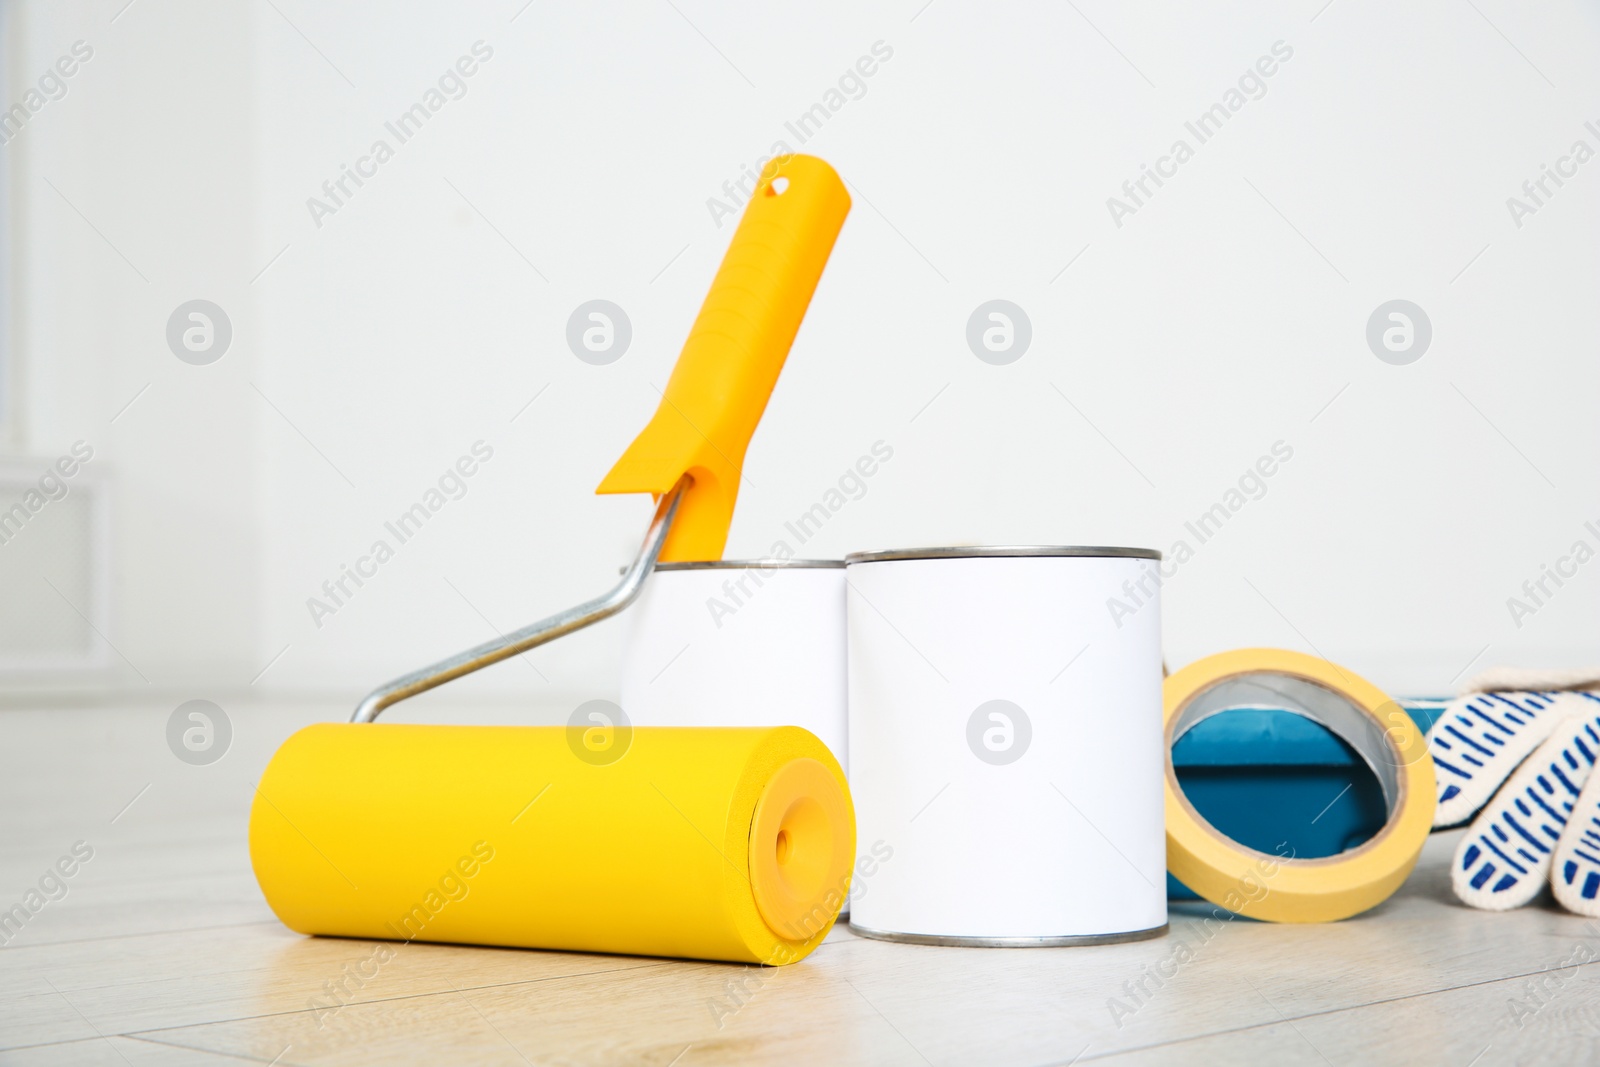 Photo of Cans of paint and decorator tools on wooden floor indoors